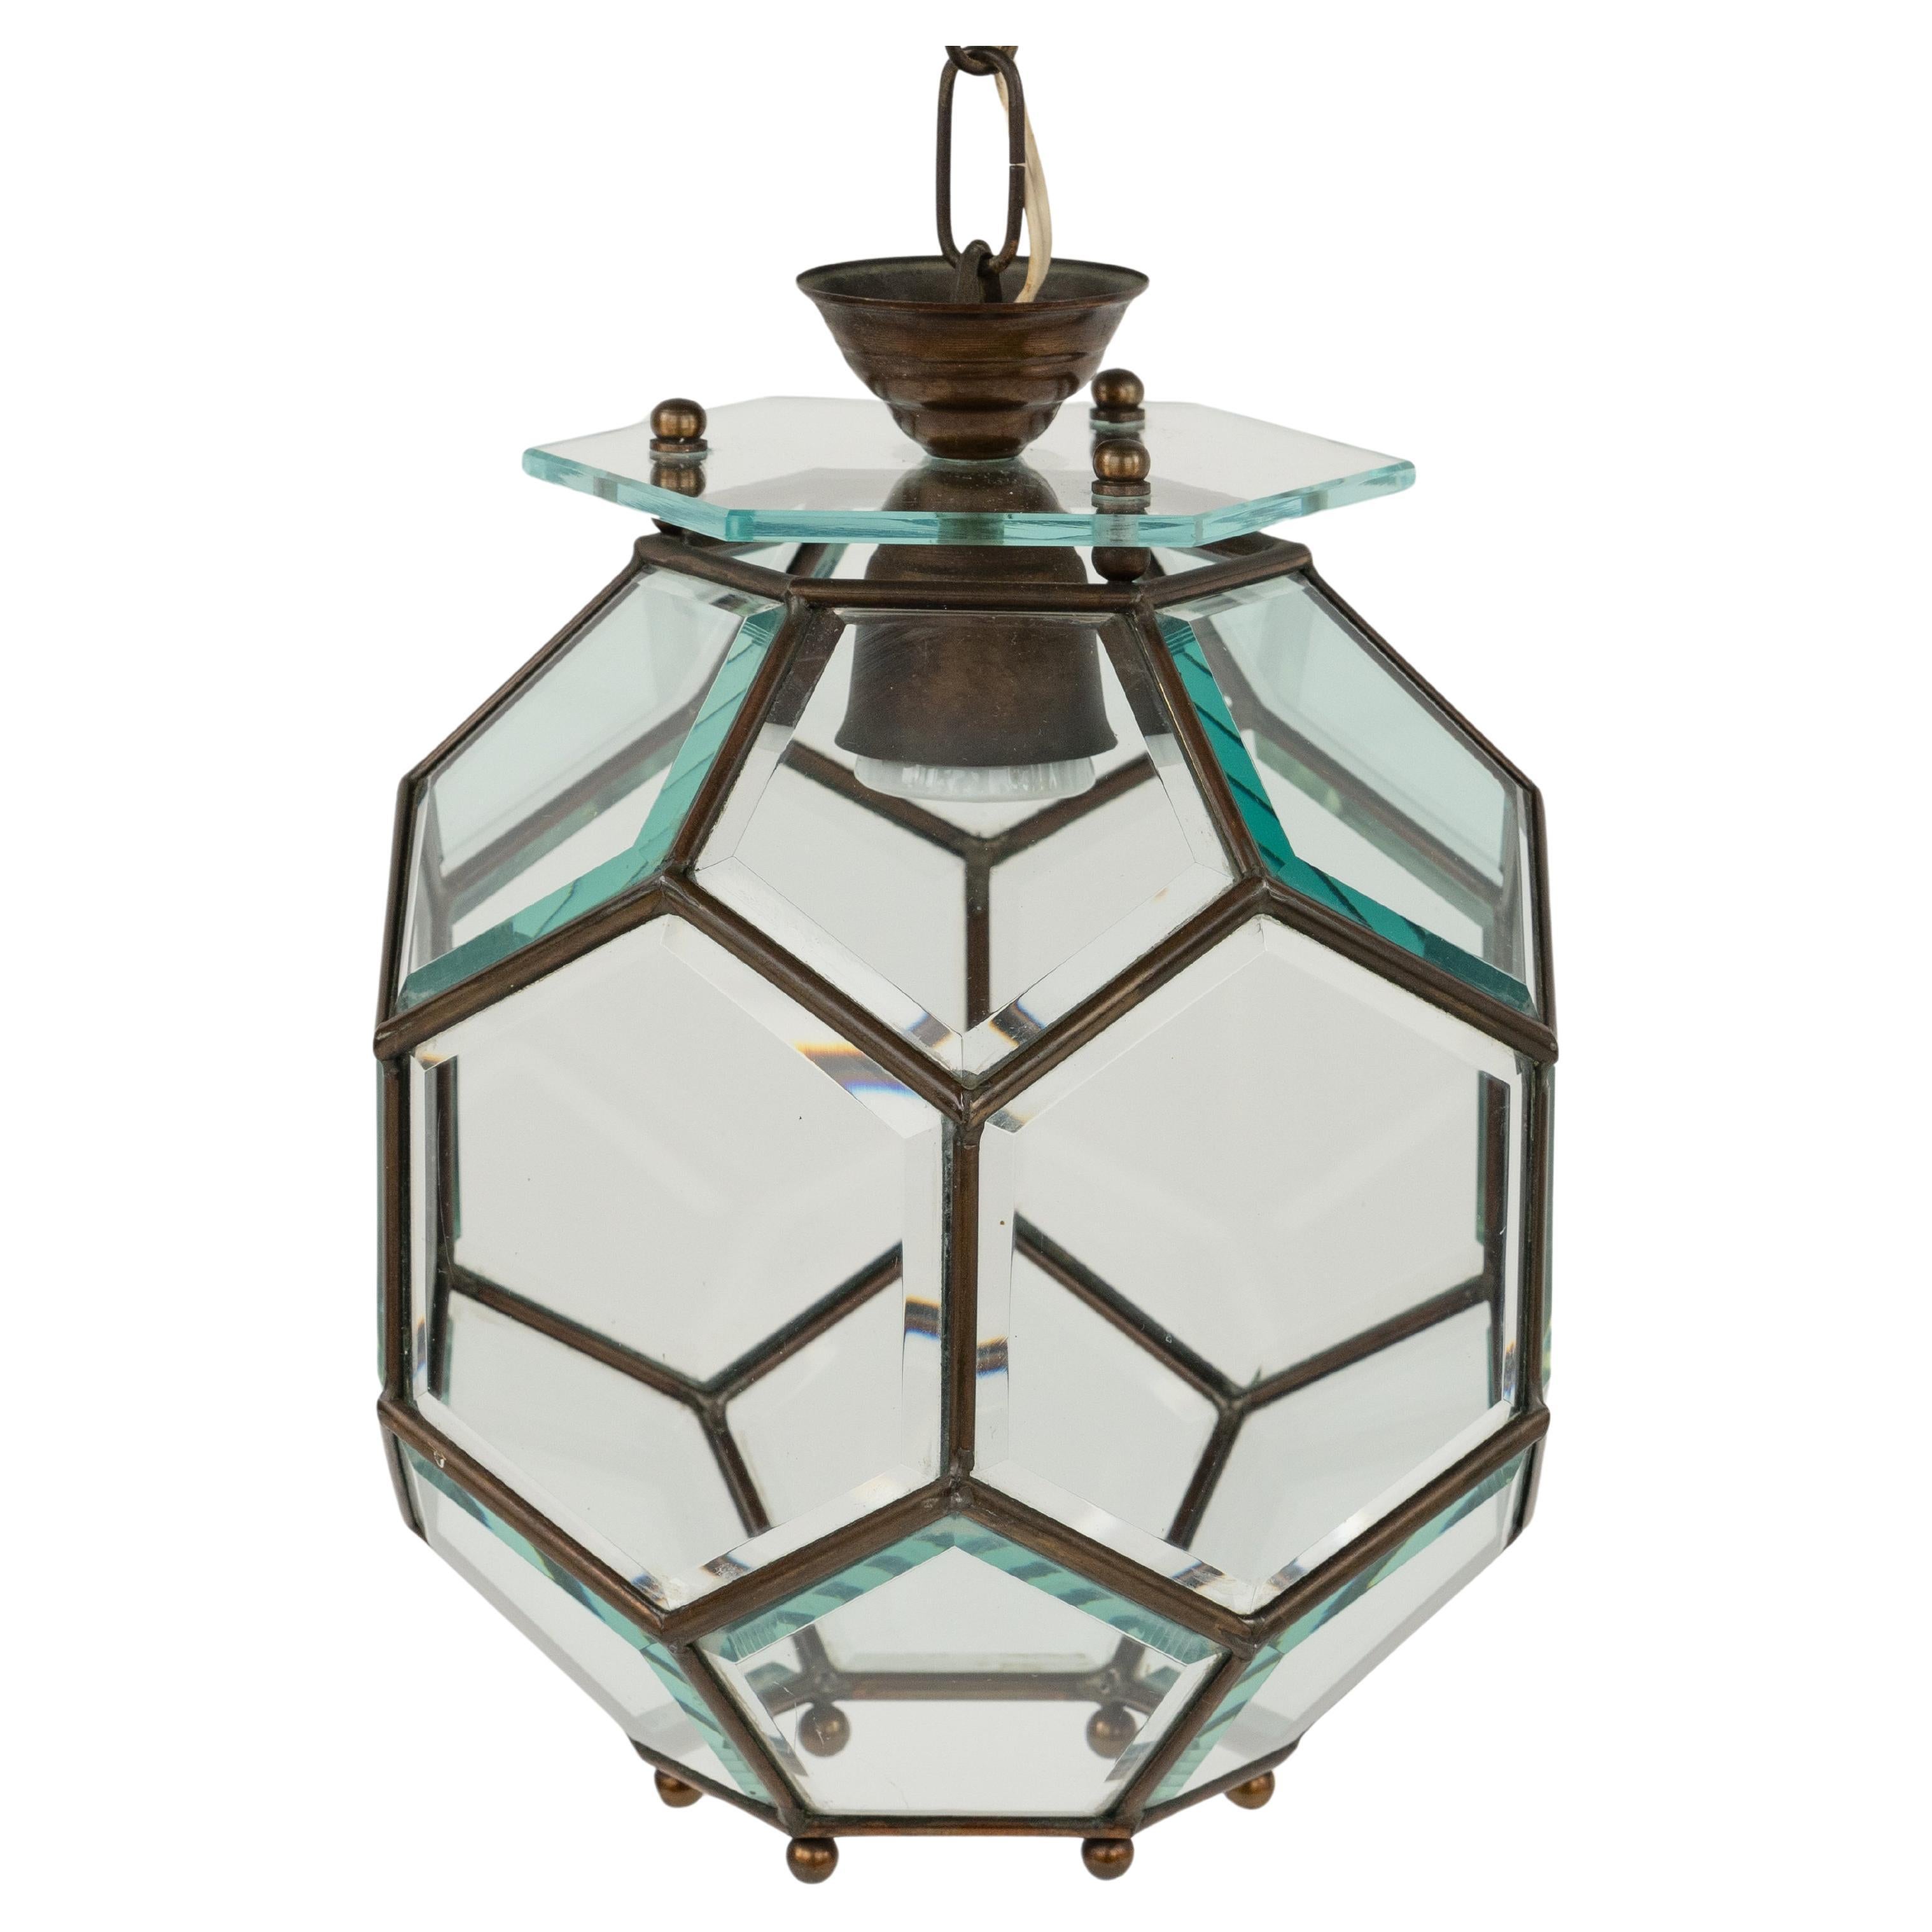 Midcentury amazing chandelier lantern in brass and beveled glass in the style of Adolf Loos.  

Made in Italy in the 1950s.  

The stunning and clear cut pendant shows eighteen facetted clear glasses in a brass frame.   

Measures:  
Height with